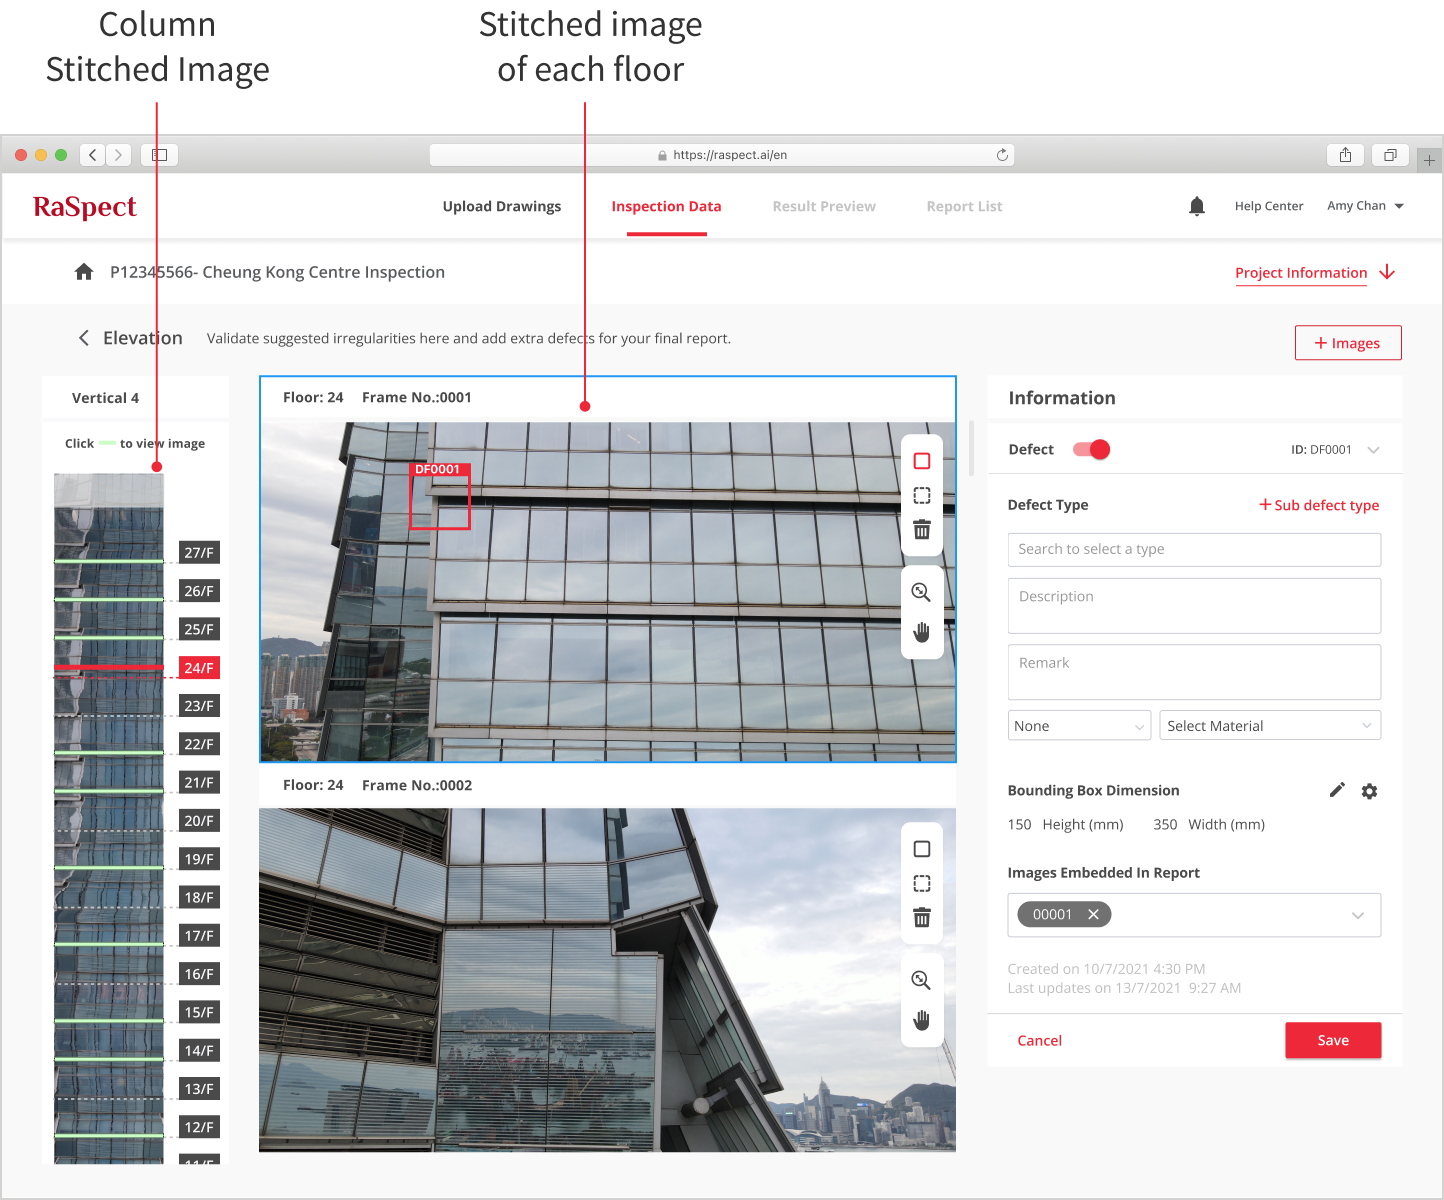 Curtain Wall Inspection, Al-assisted system utilizes video-based reconstruction to locate defects on verticalpanoramic columns of a building's façade.